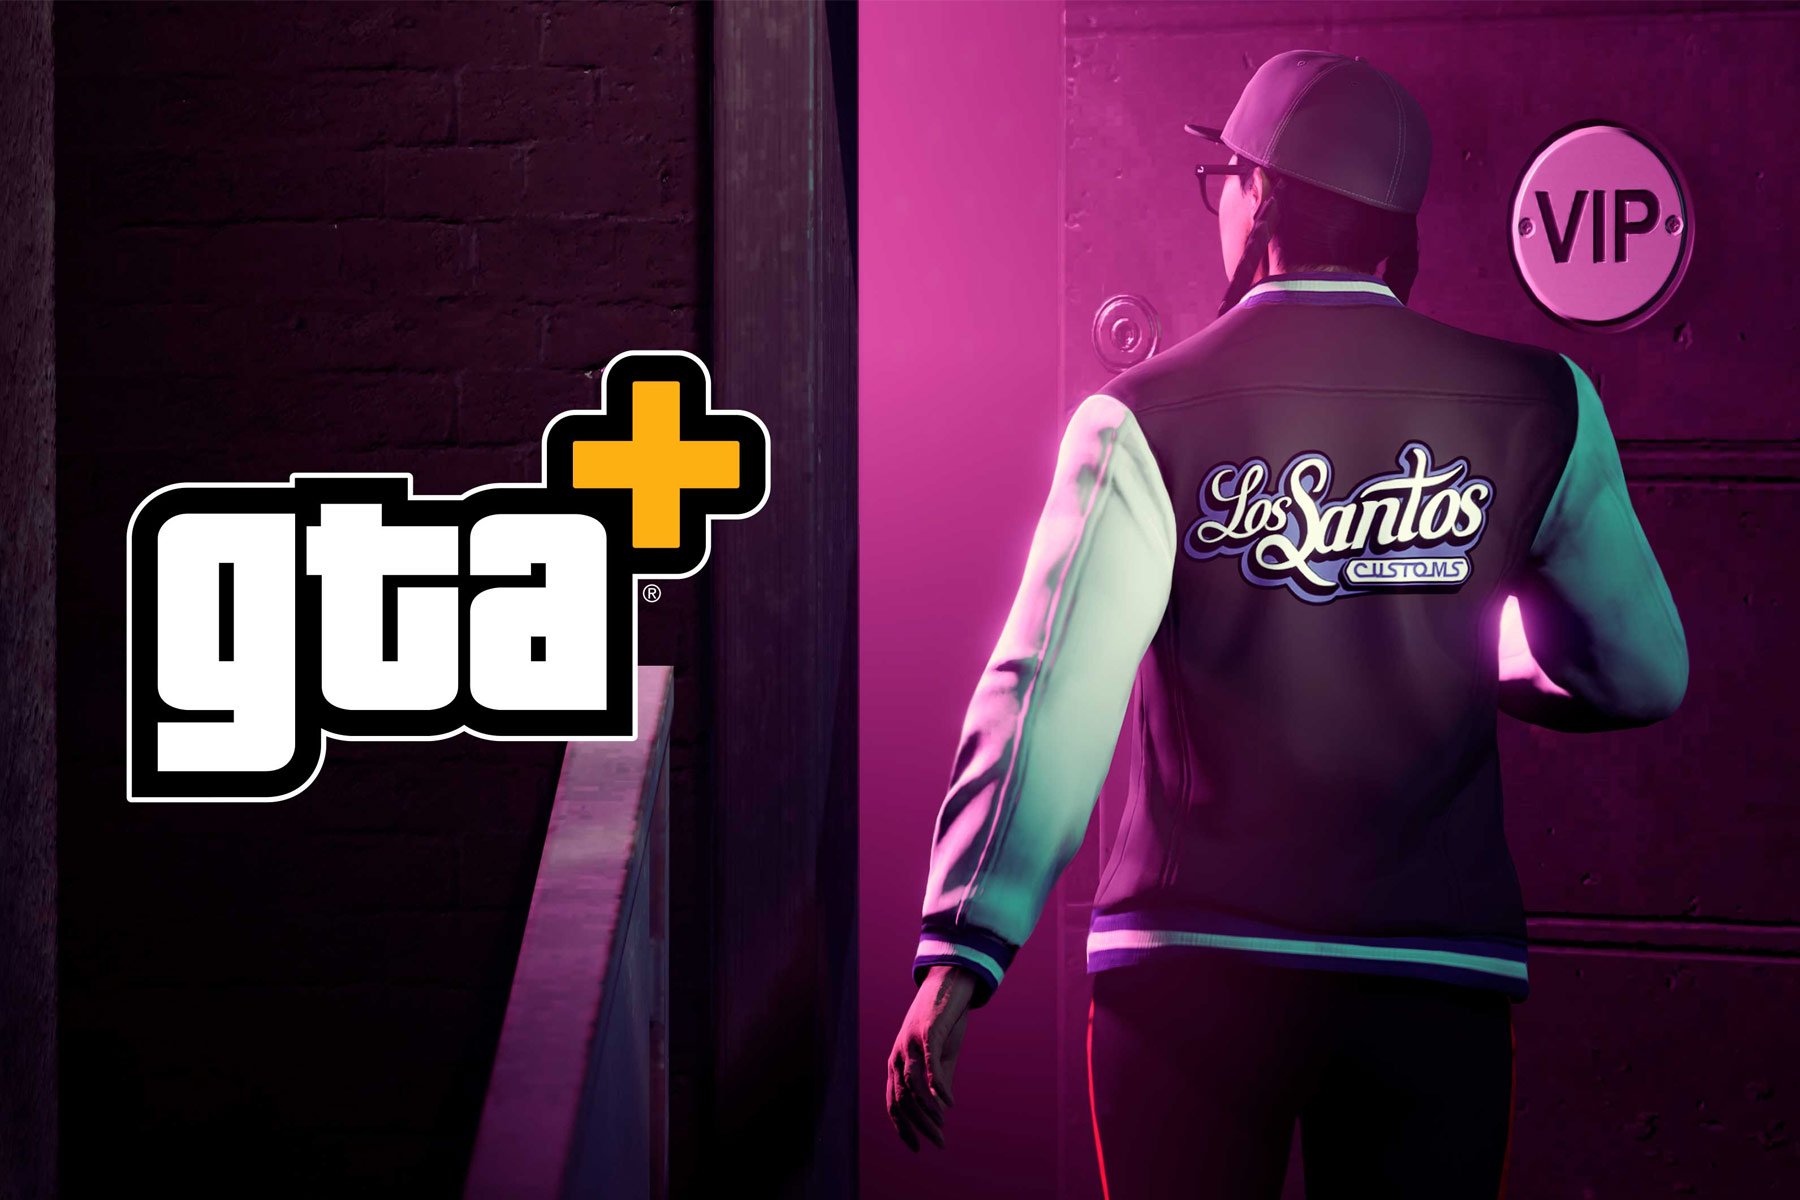 GTA+ price increase leaves Xbox users fuming, and rightfully so